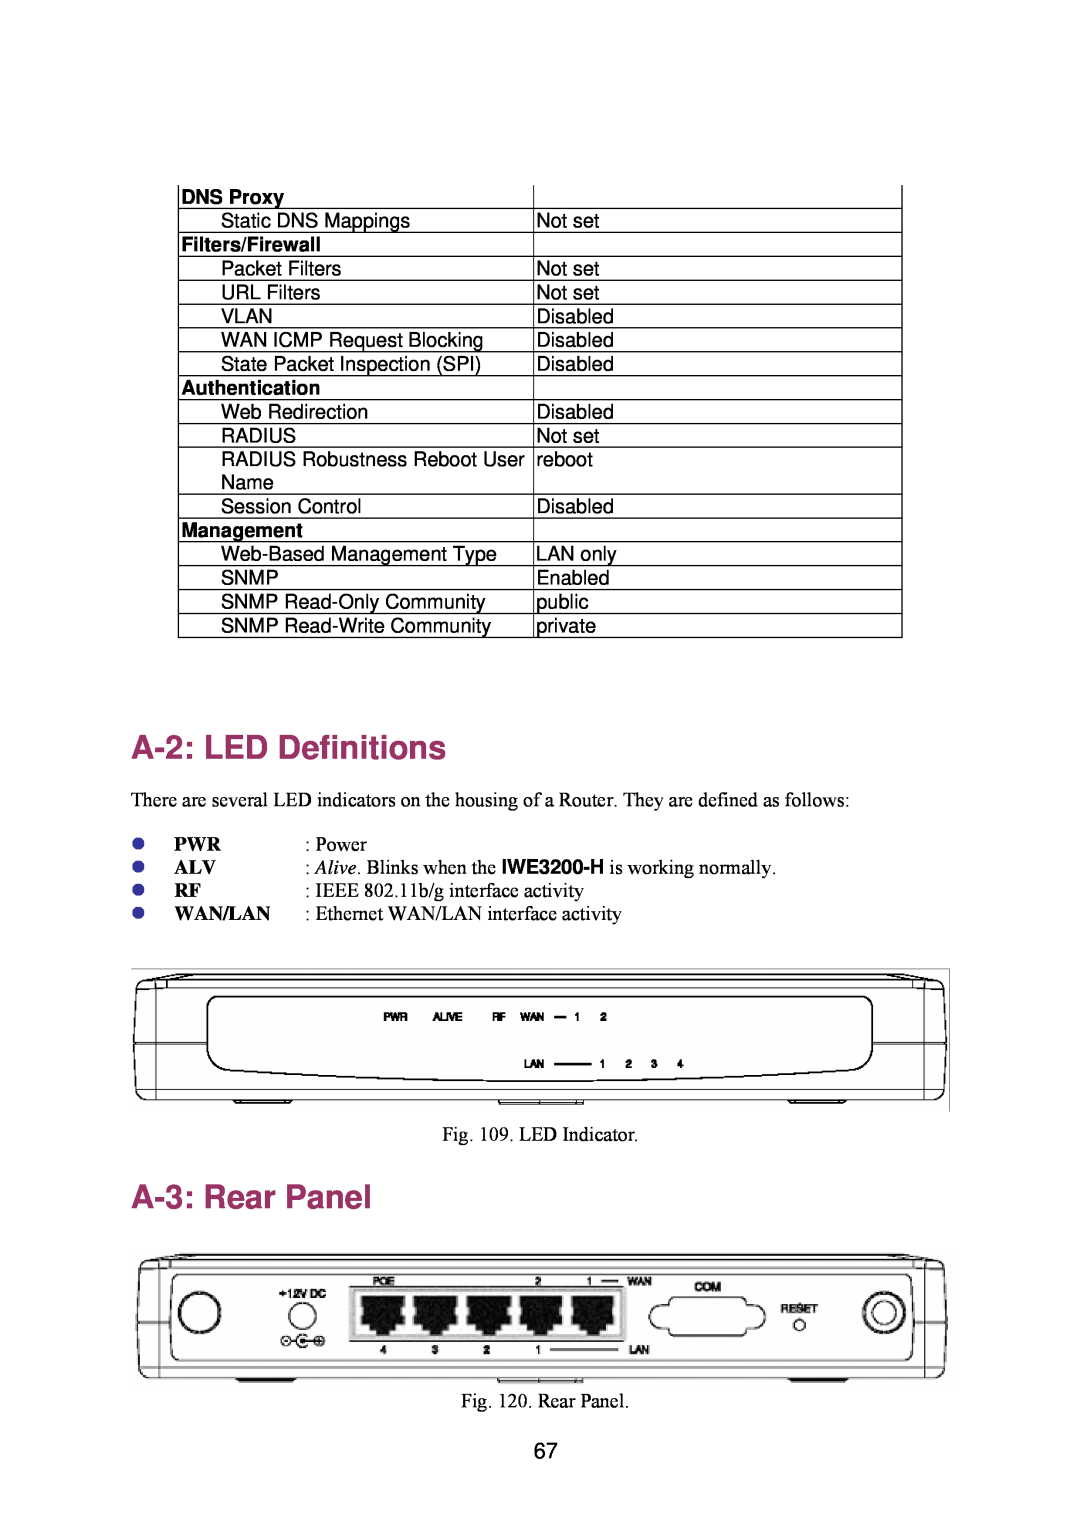 Epson IWE3200-H manual A-2:LED Definitions, A-3:Rear Panel, DNS Proxy, Filters/Firewall, Authentication, Management 